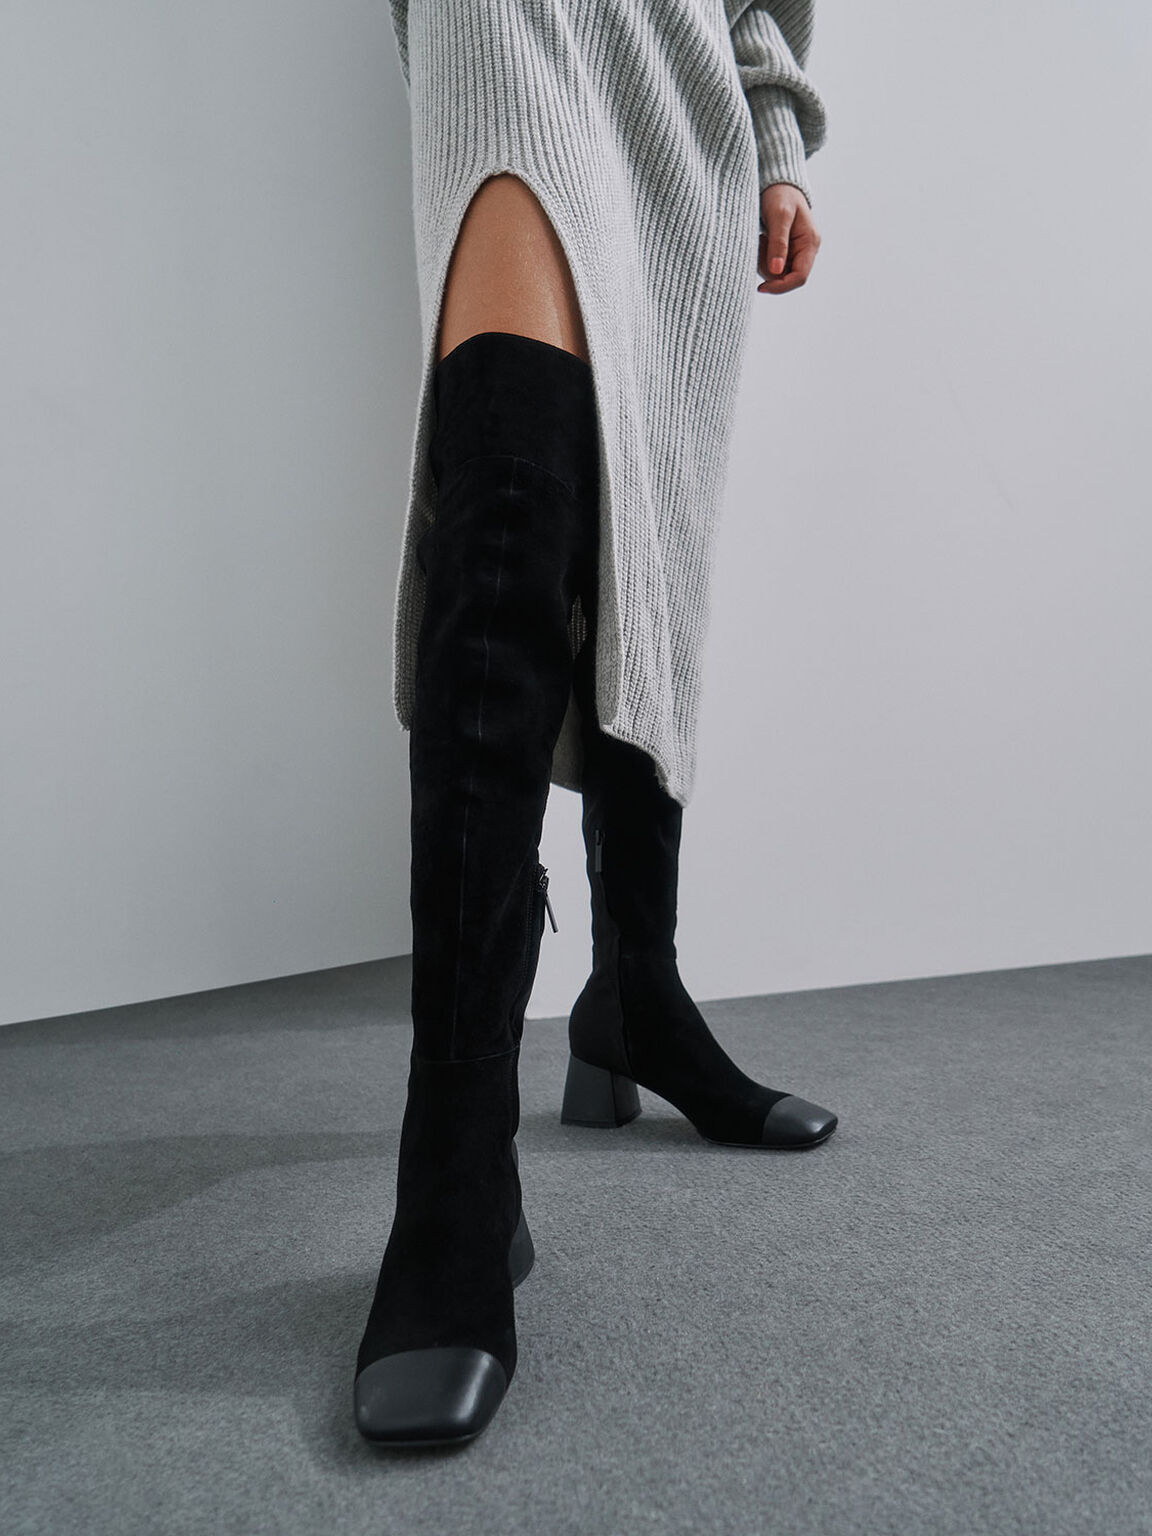 Leather & Kid Suede Thigh High Boots, Black, hi-res